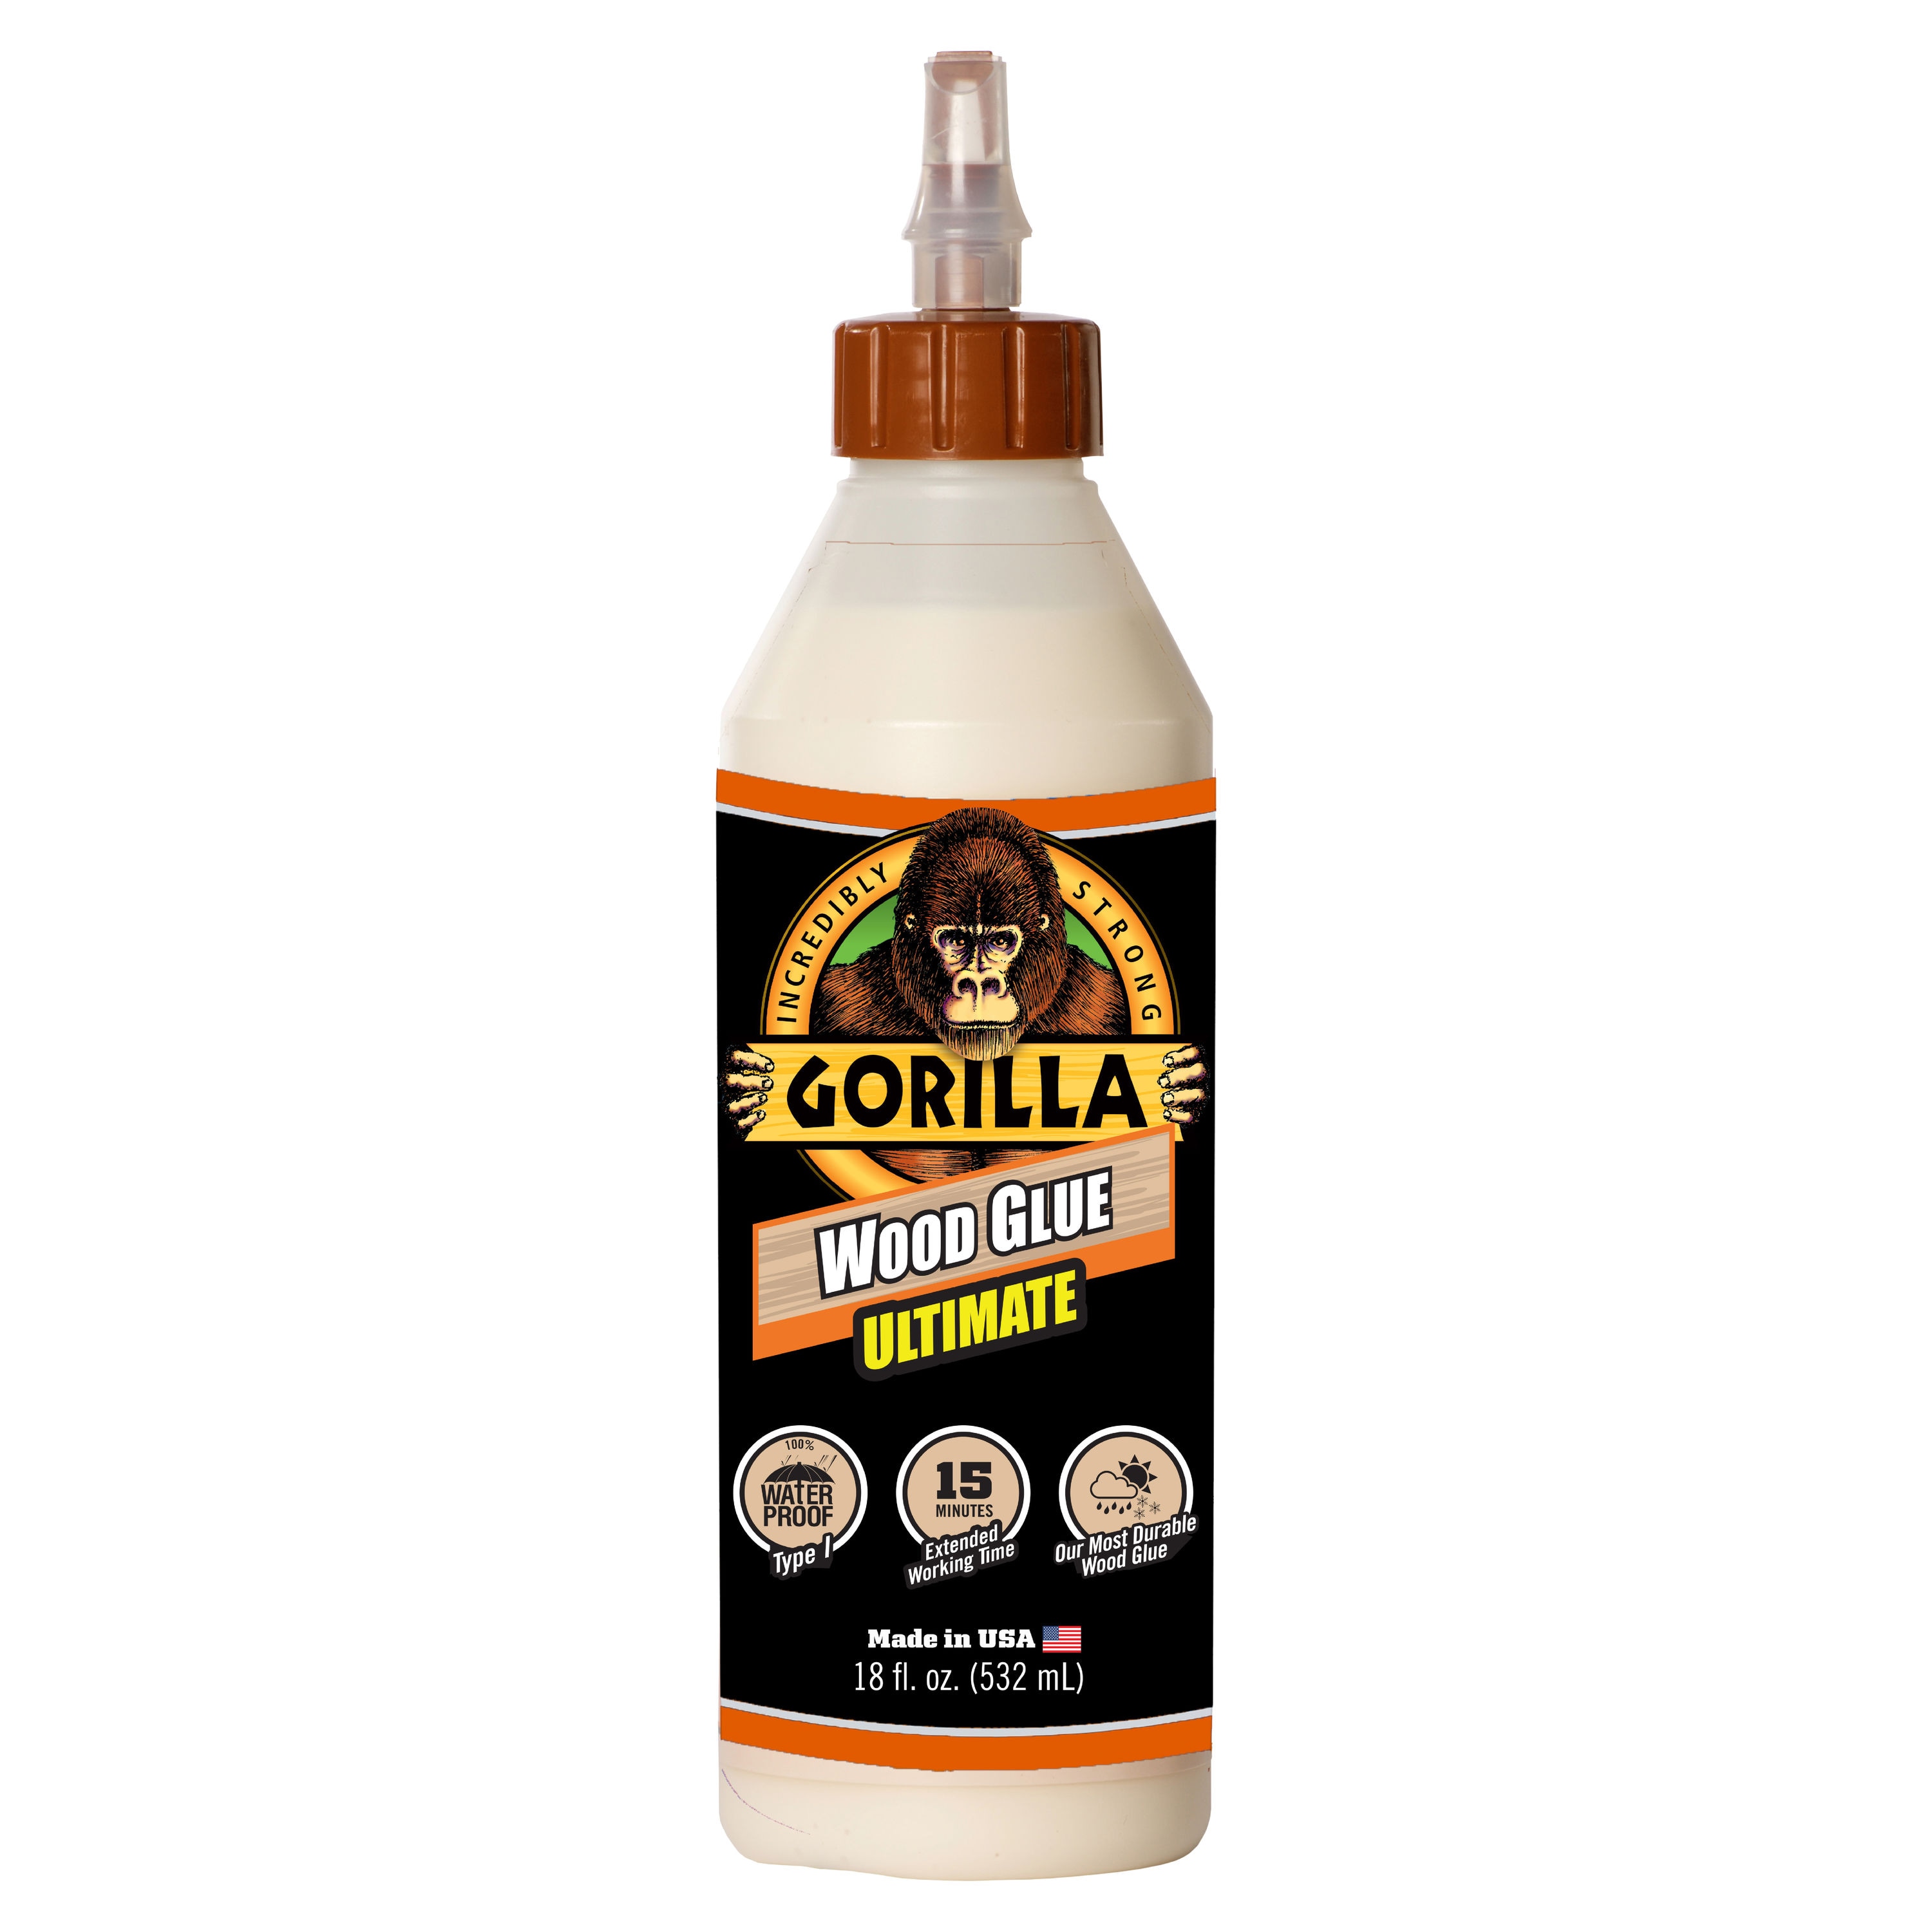 How To Open Gorilla Wood Glue Container